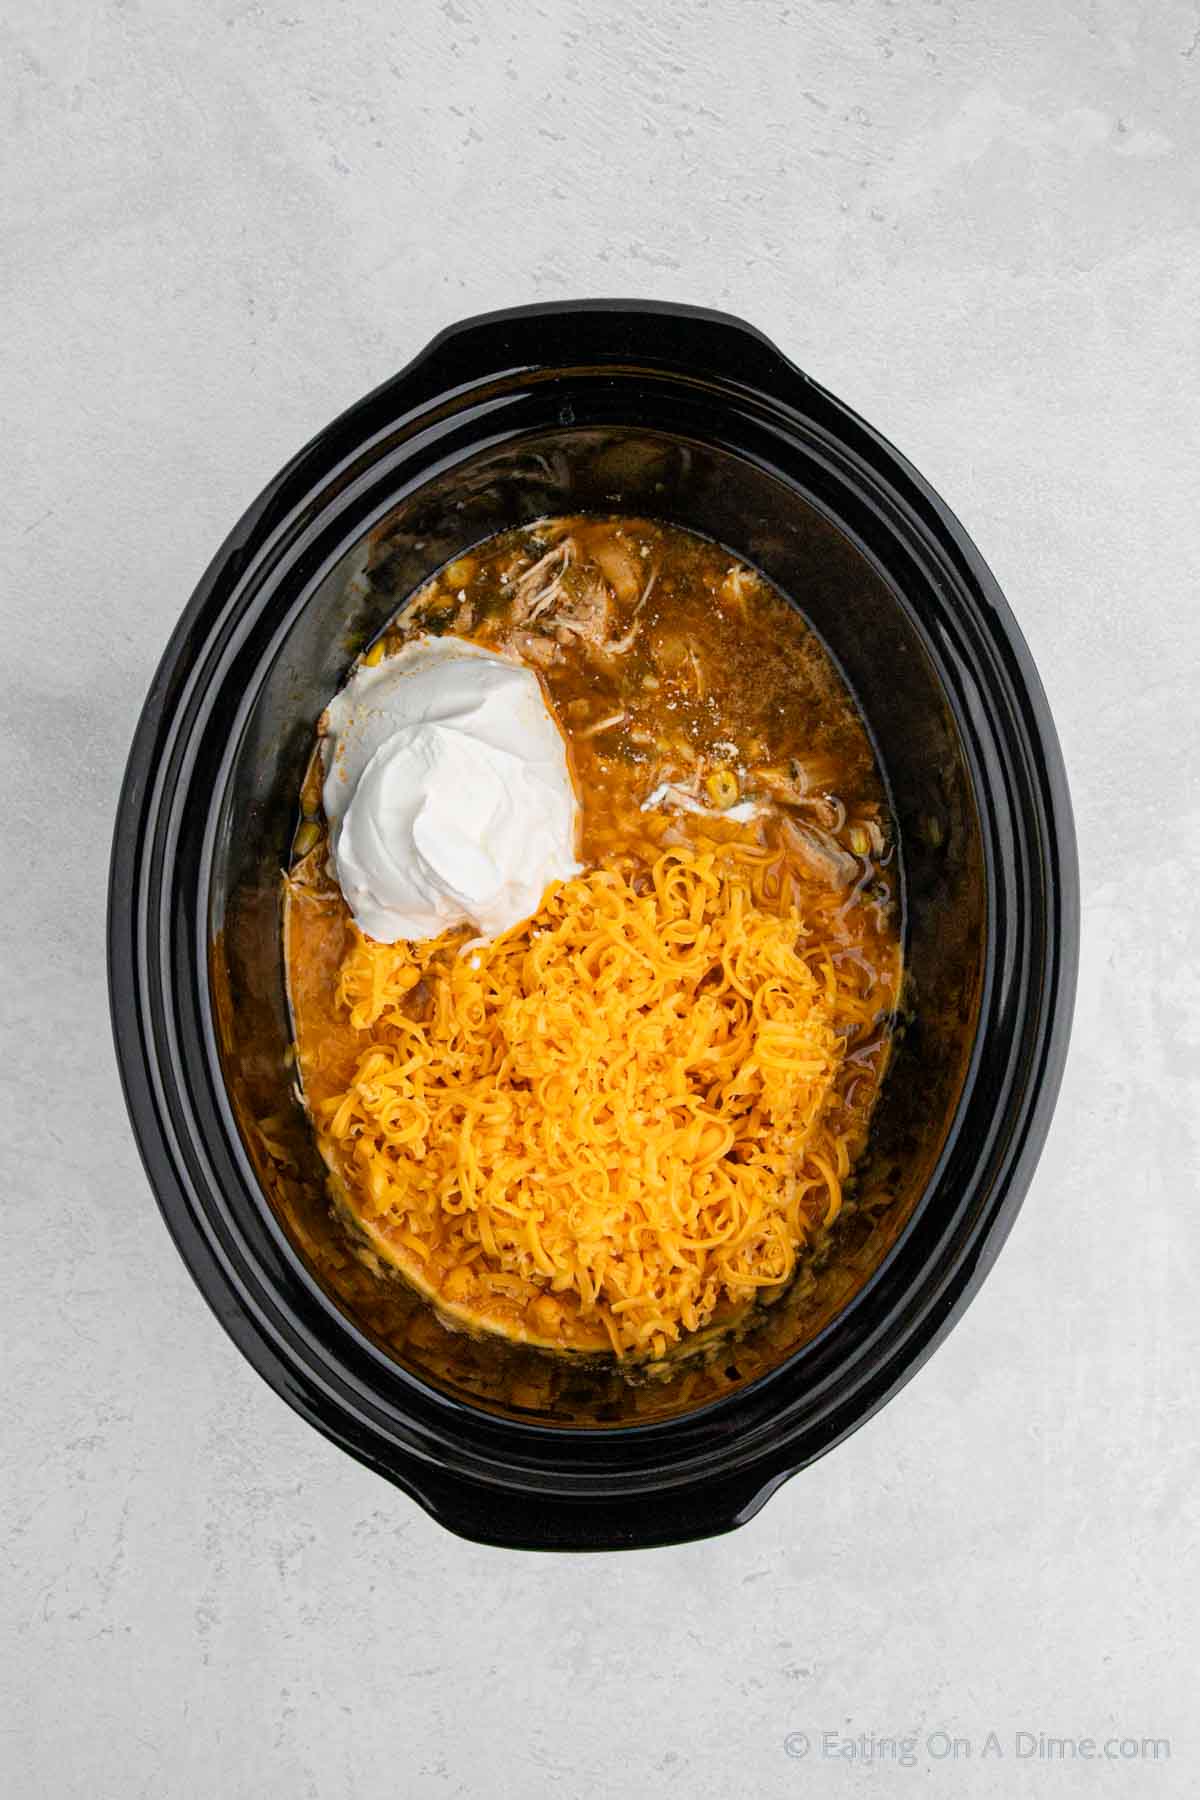 Adding the sour cream and shredded cheese in the slow cooker